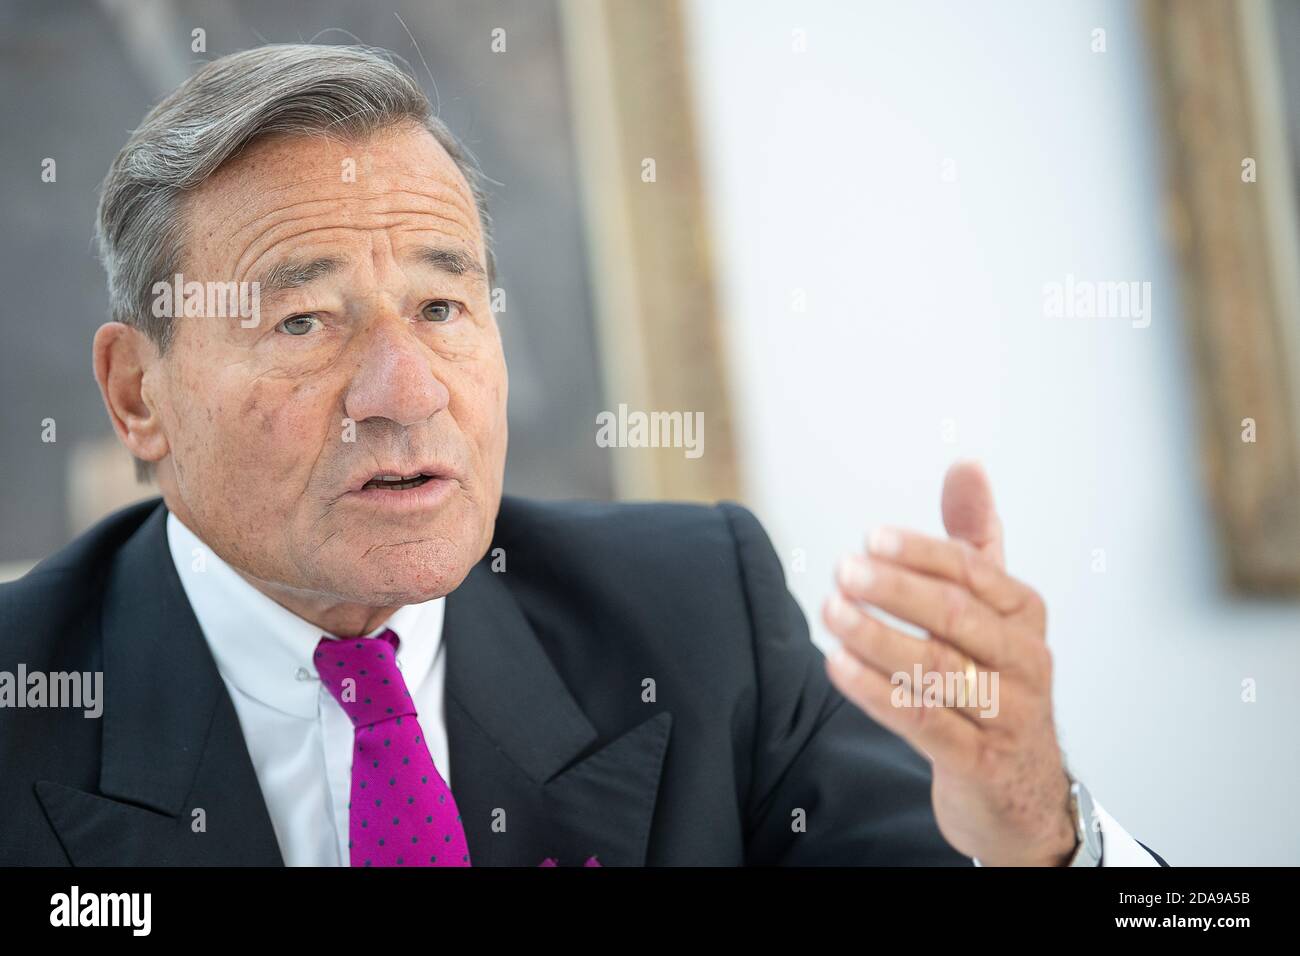 Burladingen, Germany. 05th Nov, 2020. Wolfgang Grupp, sole owner and  managing director of the textile company Trigema, speaks during an  interview. (to dpa: "Trigema boss Wolfgang Grupp does not think about  quitting")